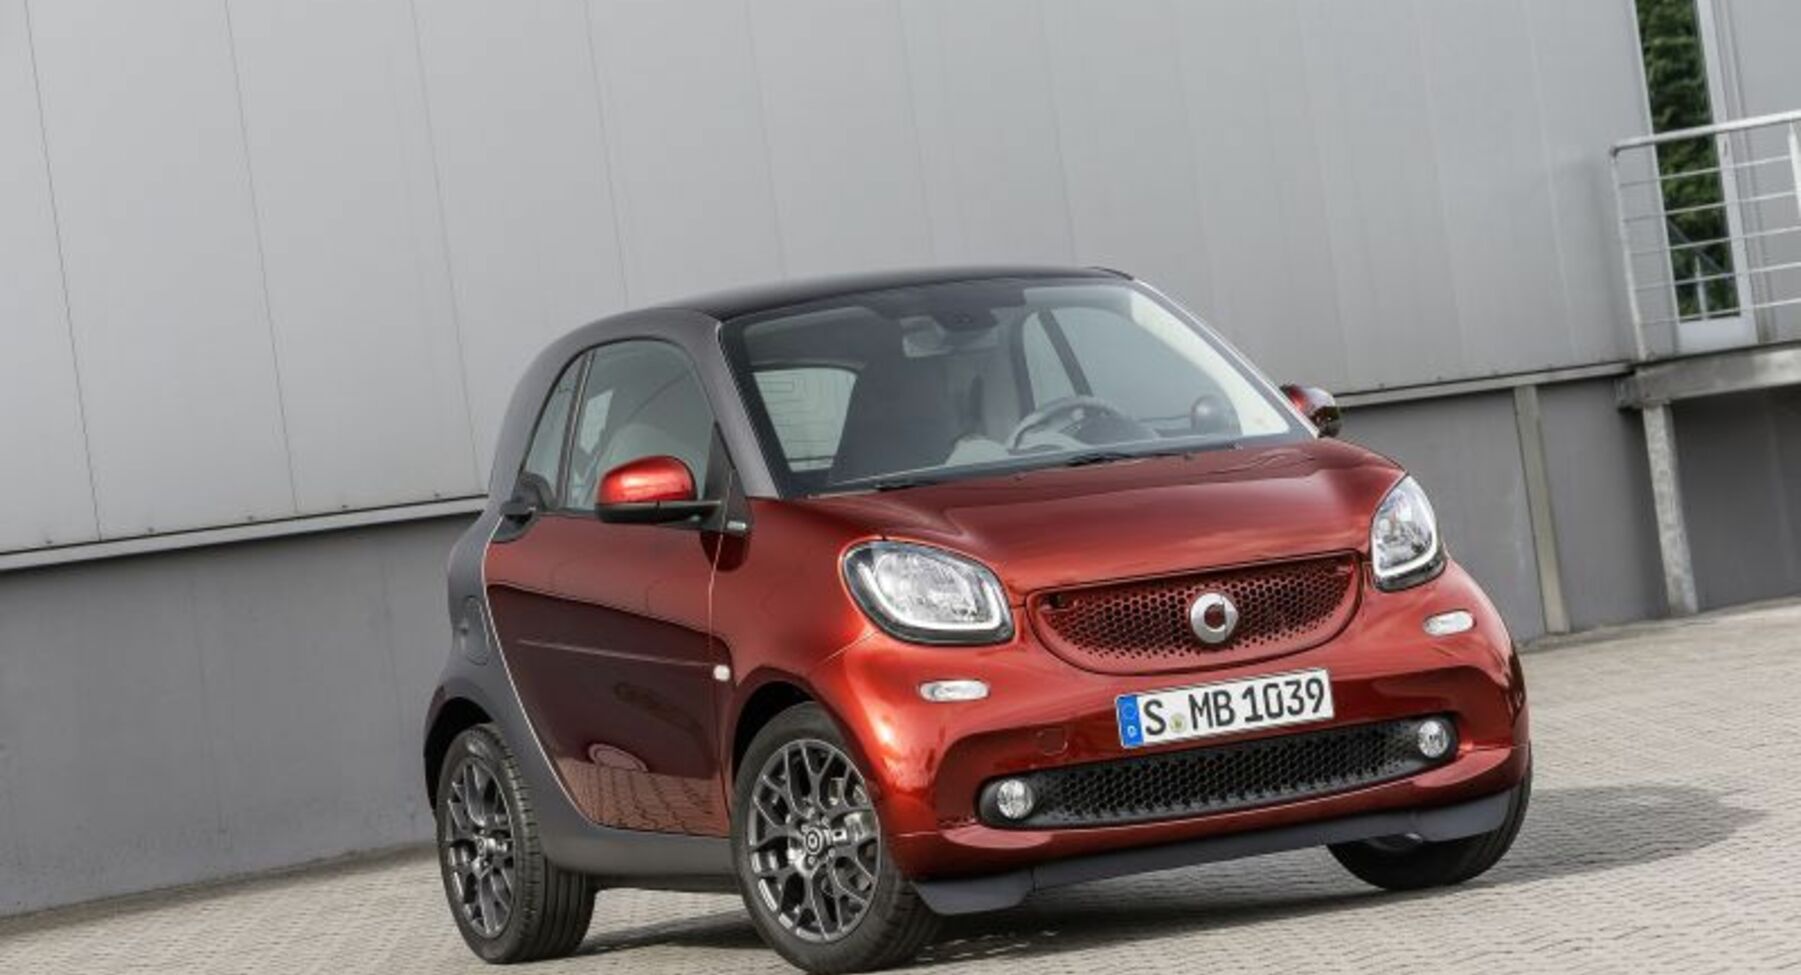 Smart Fortwo III coupe (C453) Brabus 17.6 kWh (82 Hp) electric drive 2014, 2015, 2016, 2017 